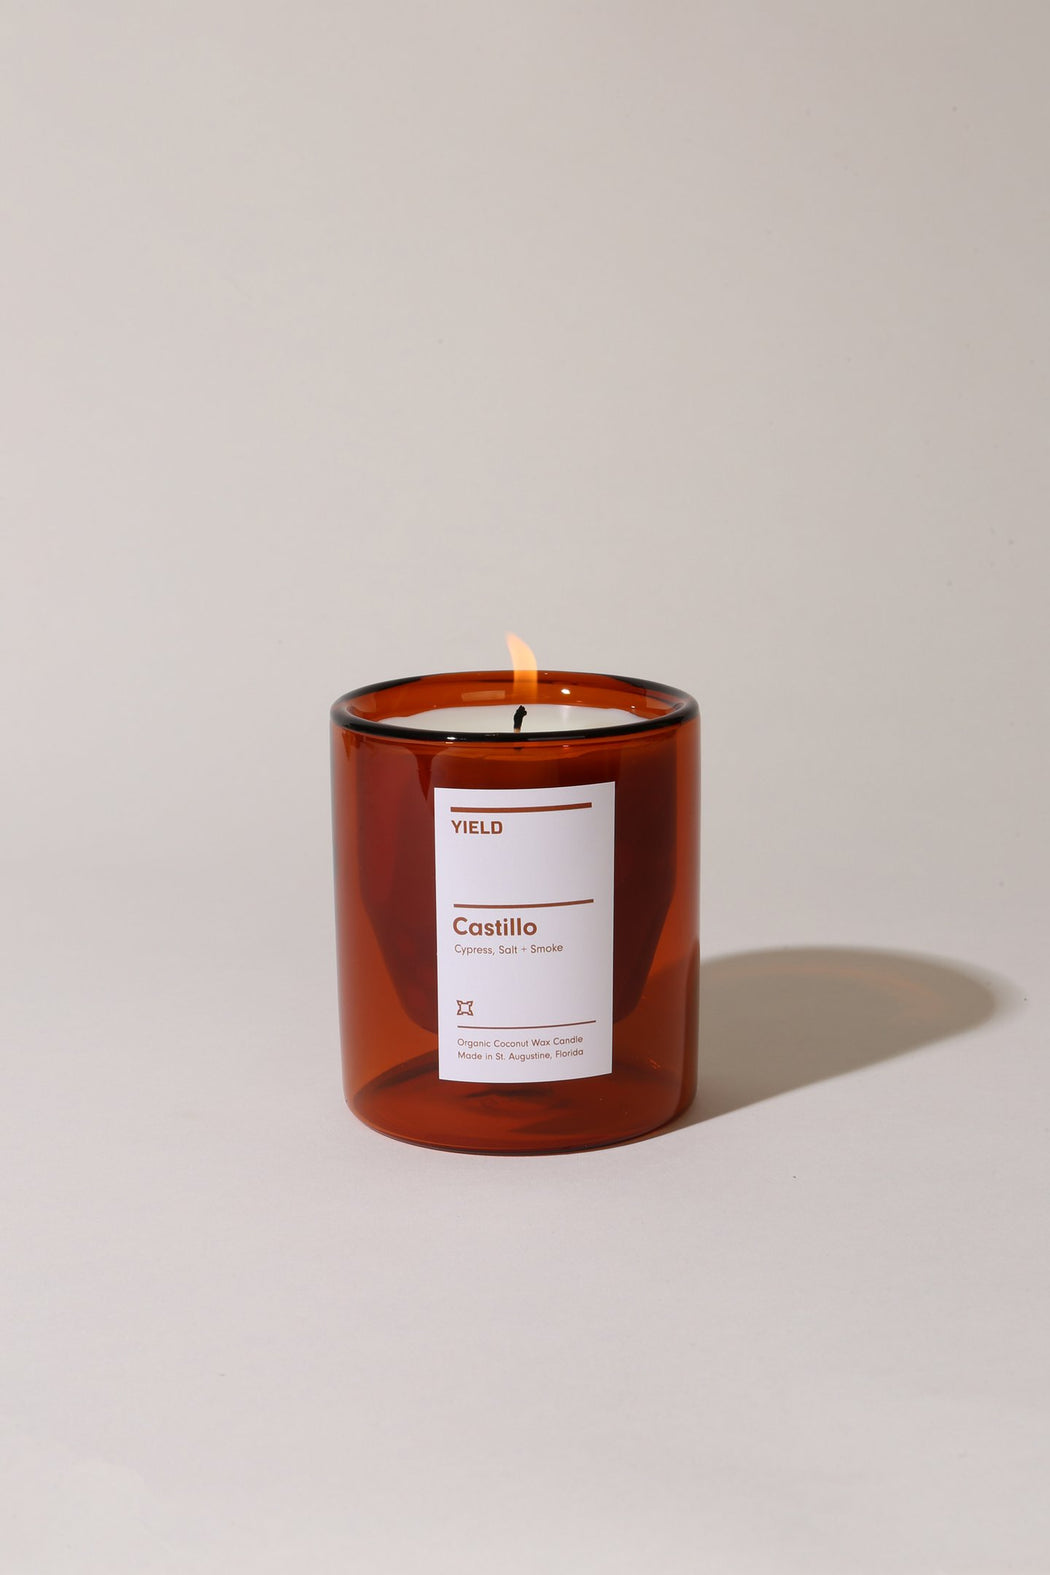 YIELD - 6 oz Castillo Double Walled Candle